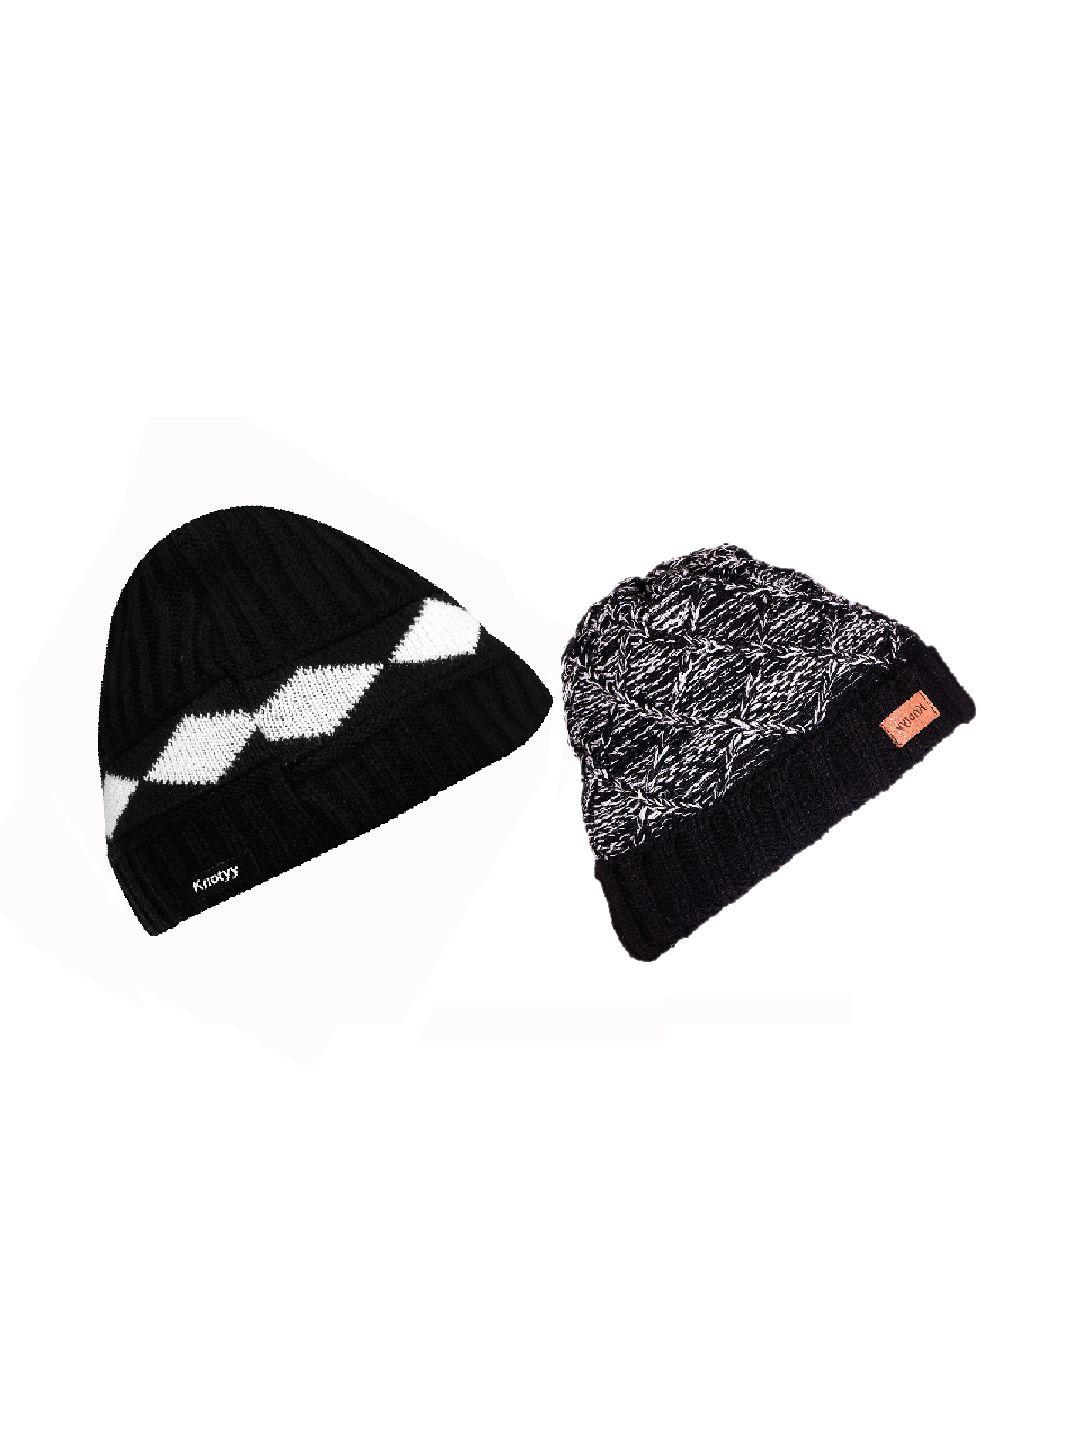 knotyy men pack of 2 beanies